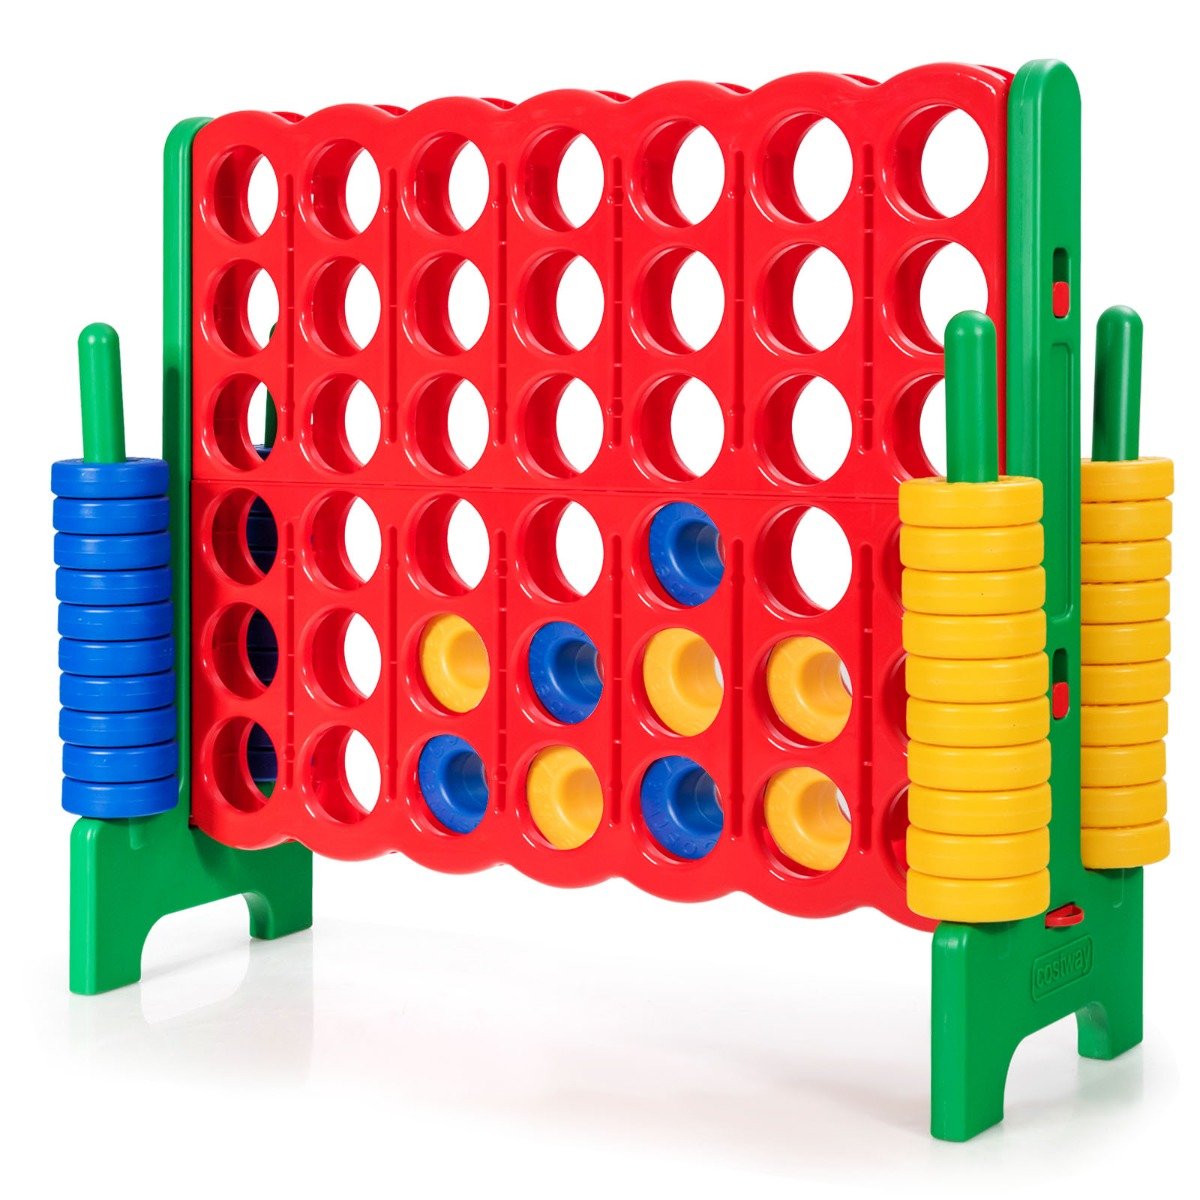 Giant Connect 4 in A Row Game - 42 Jumbo Rings for Outdoor Fun